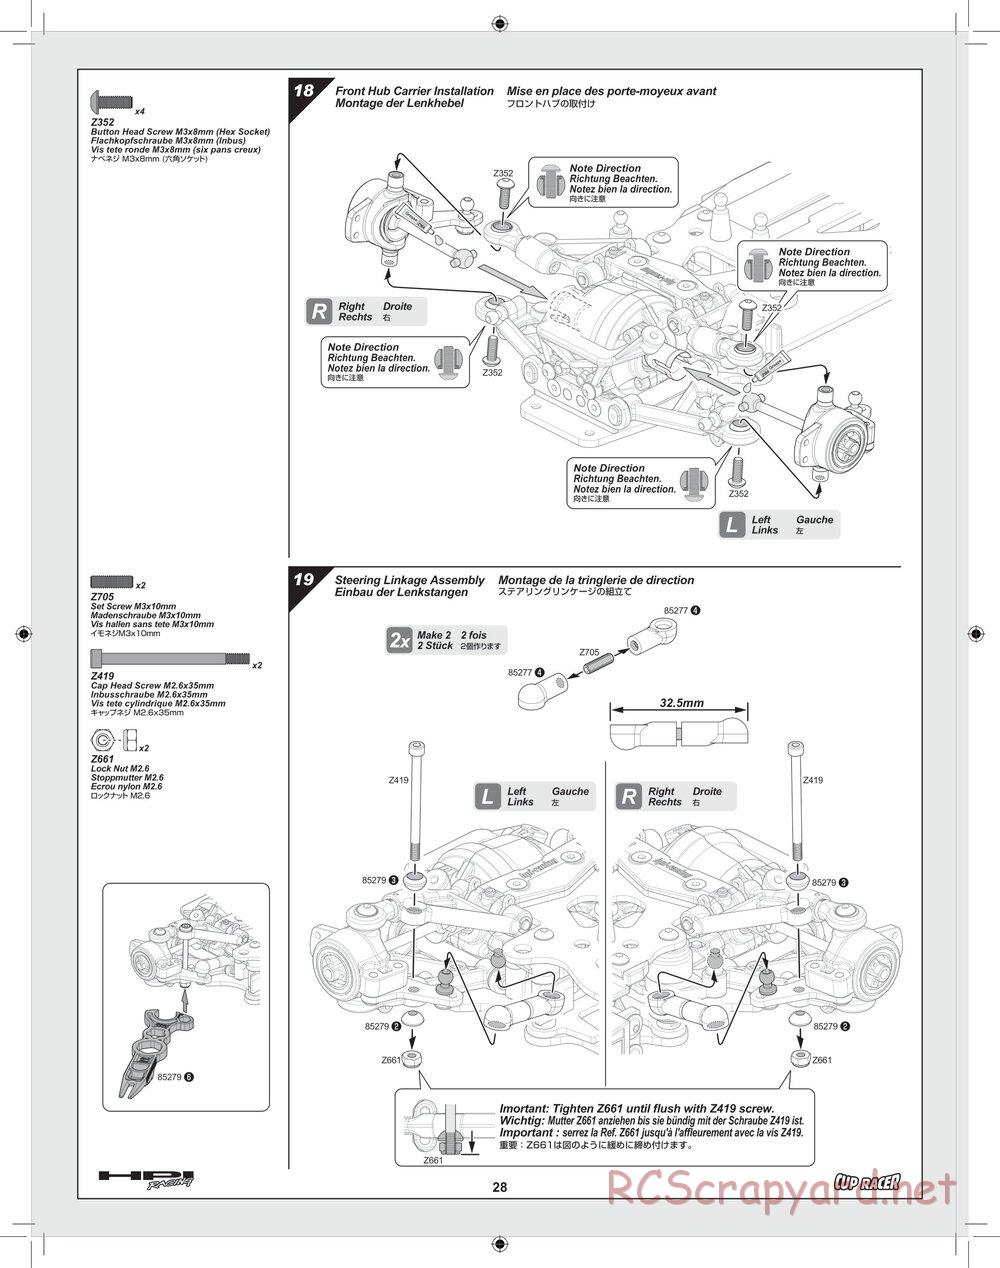 HPI - Cup Racer - Manual - Page 28